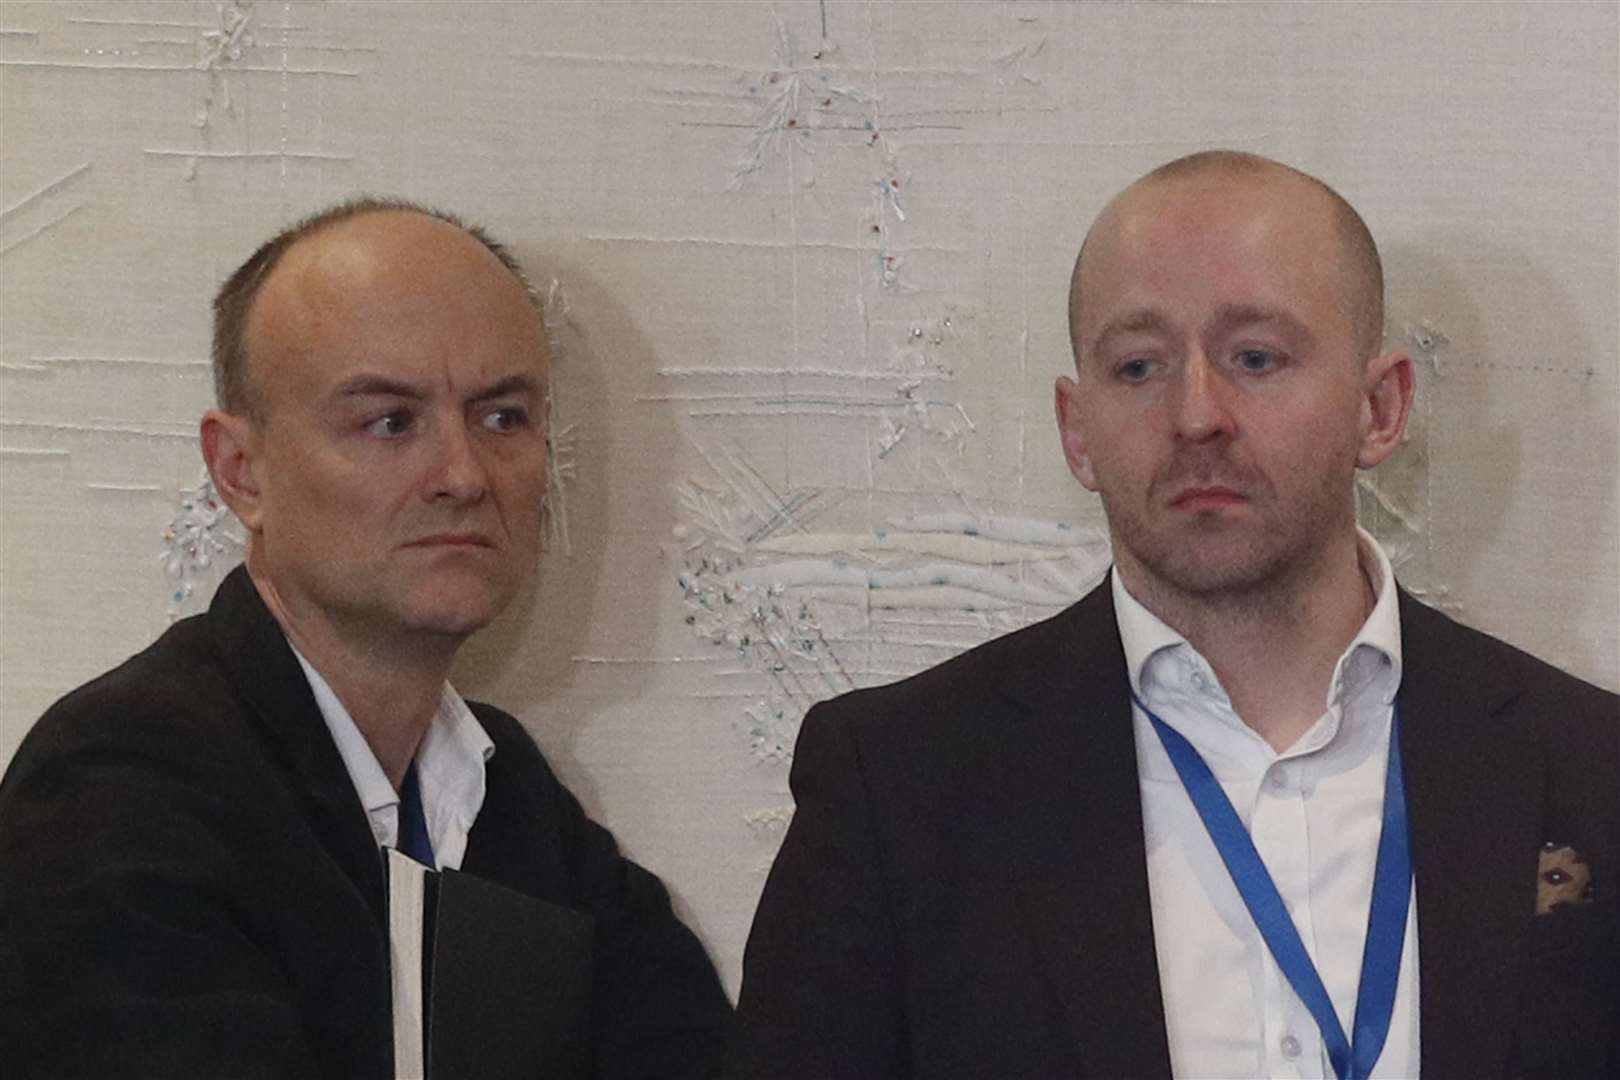 Dominic Cummings, left, and Lee Cain were previous key advisors in Downing Street (PA)